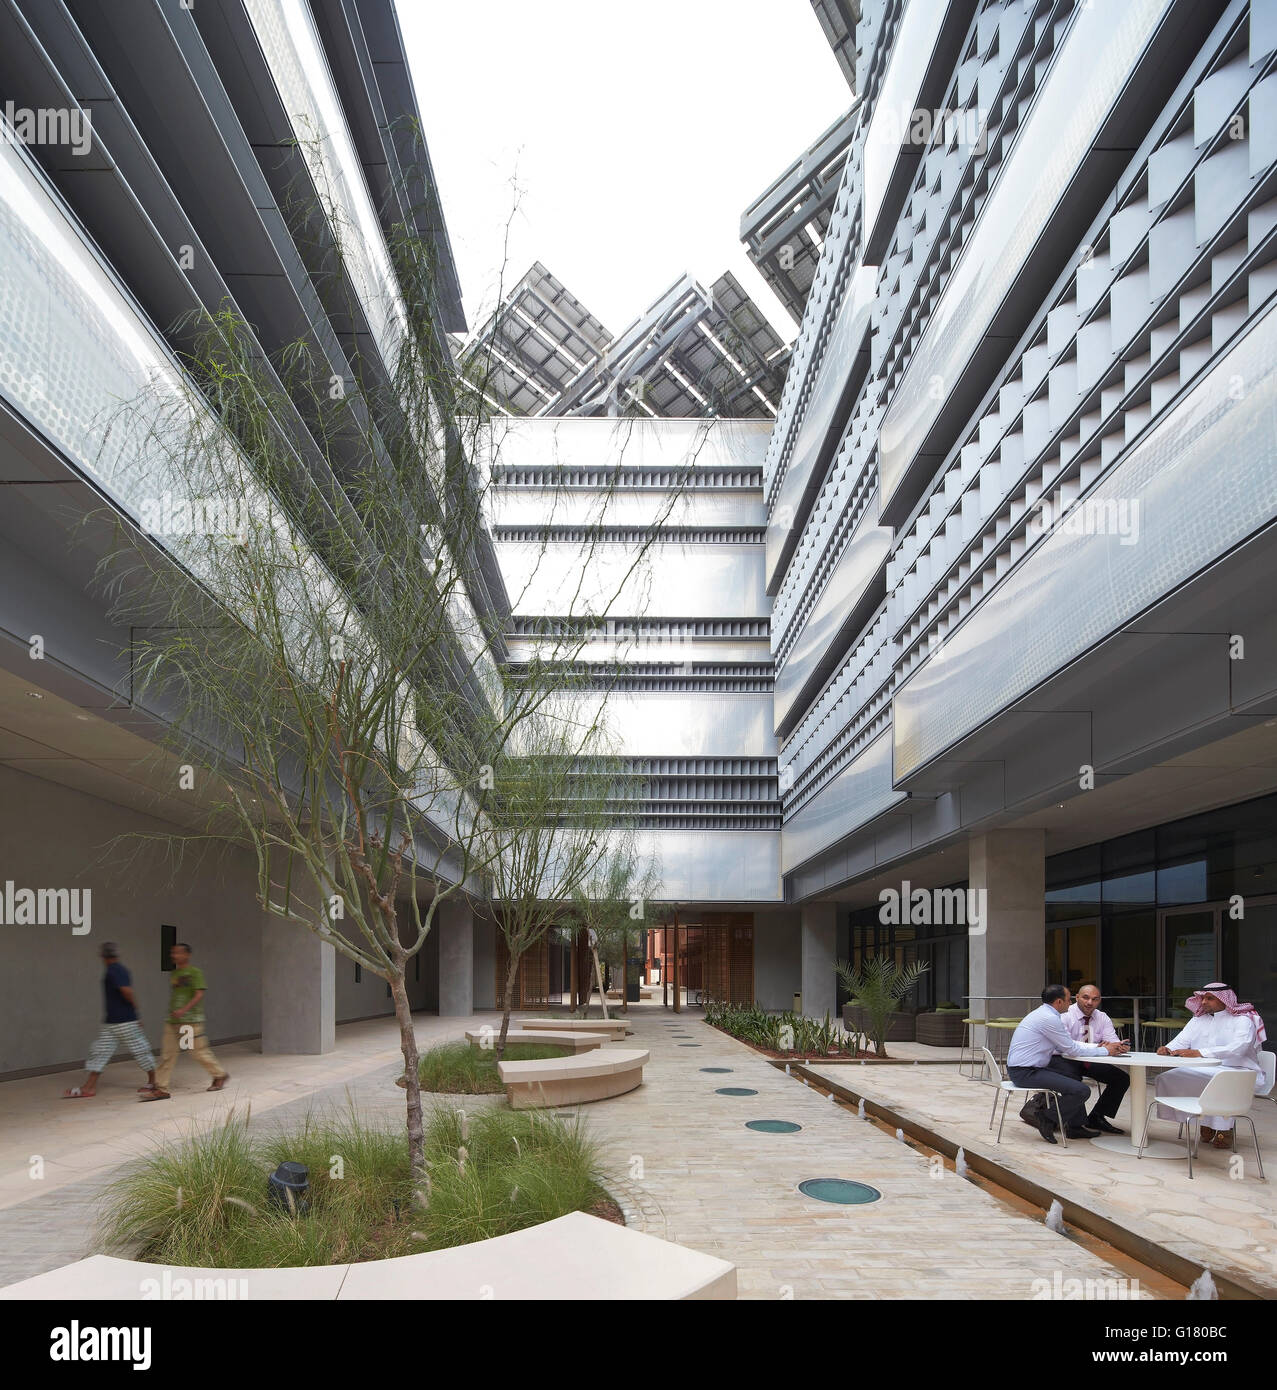 The Siemens Building, designed by Sheppard Robson with interior courtyard and seating. Masdar City, Masdar City, United Arab Emirates. Architect: various, 2014. Stock Photo